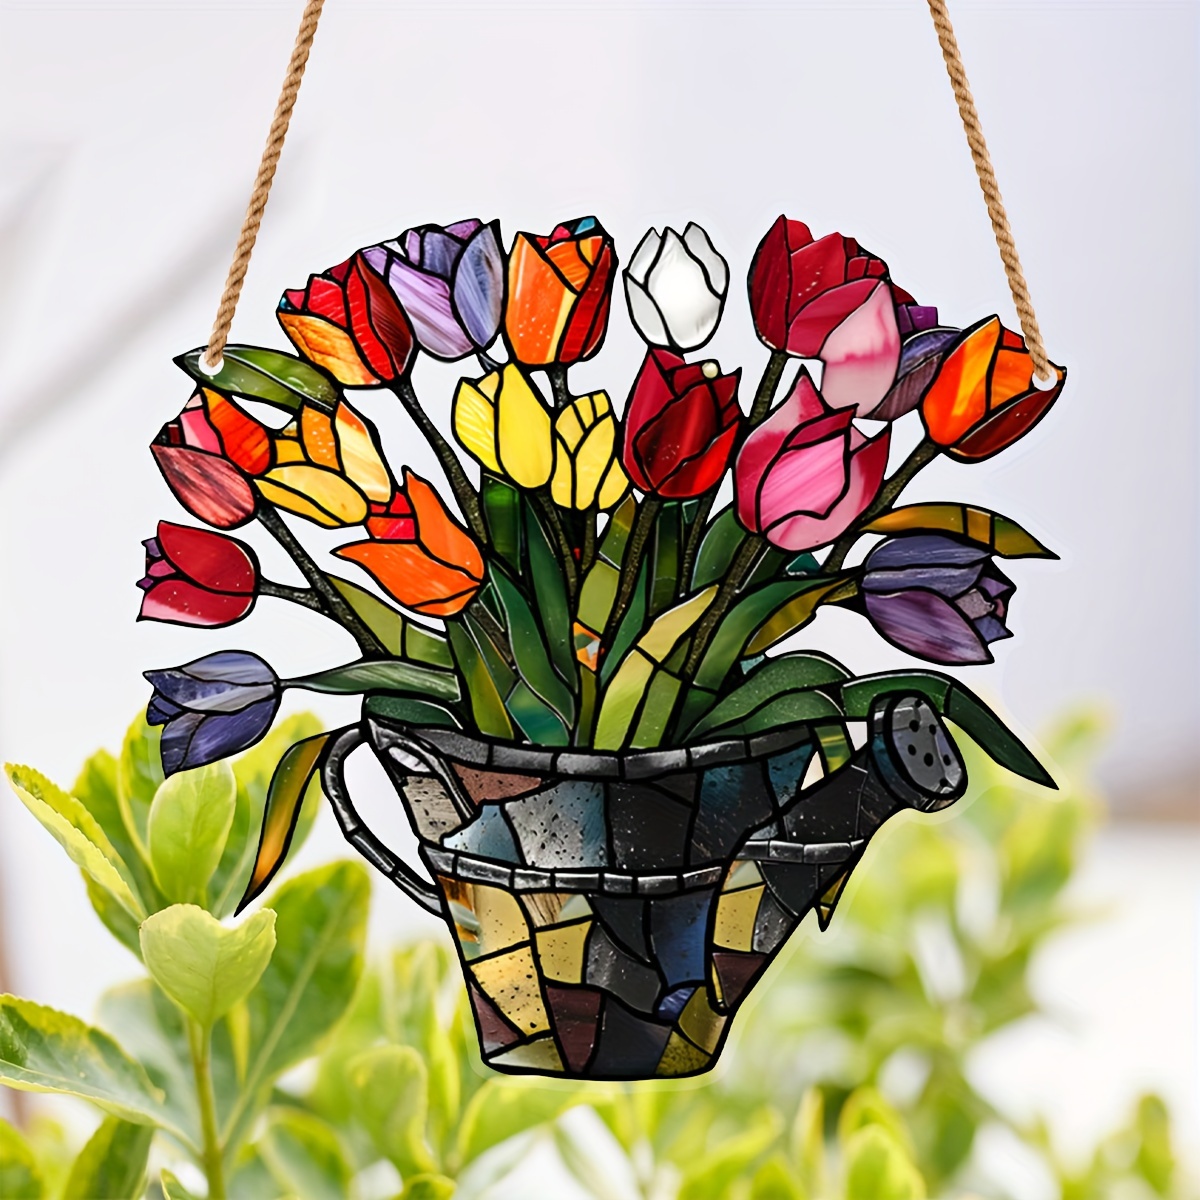 

1pc, Tulip Flowers Stained Window Hanging, Colorful Flowers Suncatcher Window Decoration, Indoor Outdoor Home Decor Garden Decoration, Wall Window Hanging Art Decoration, A Gift For Flower Lovers, Mom